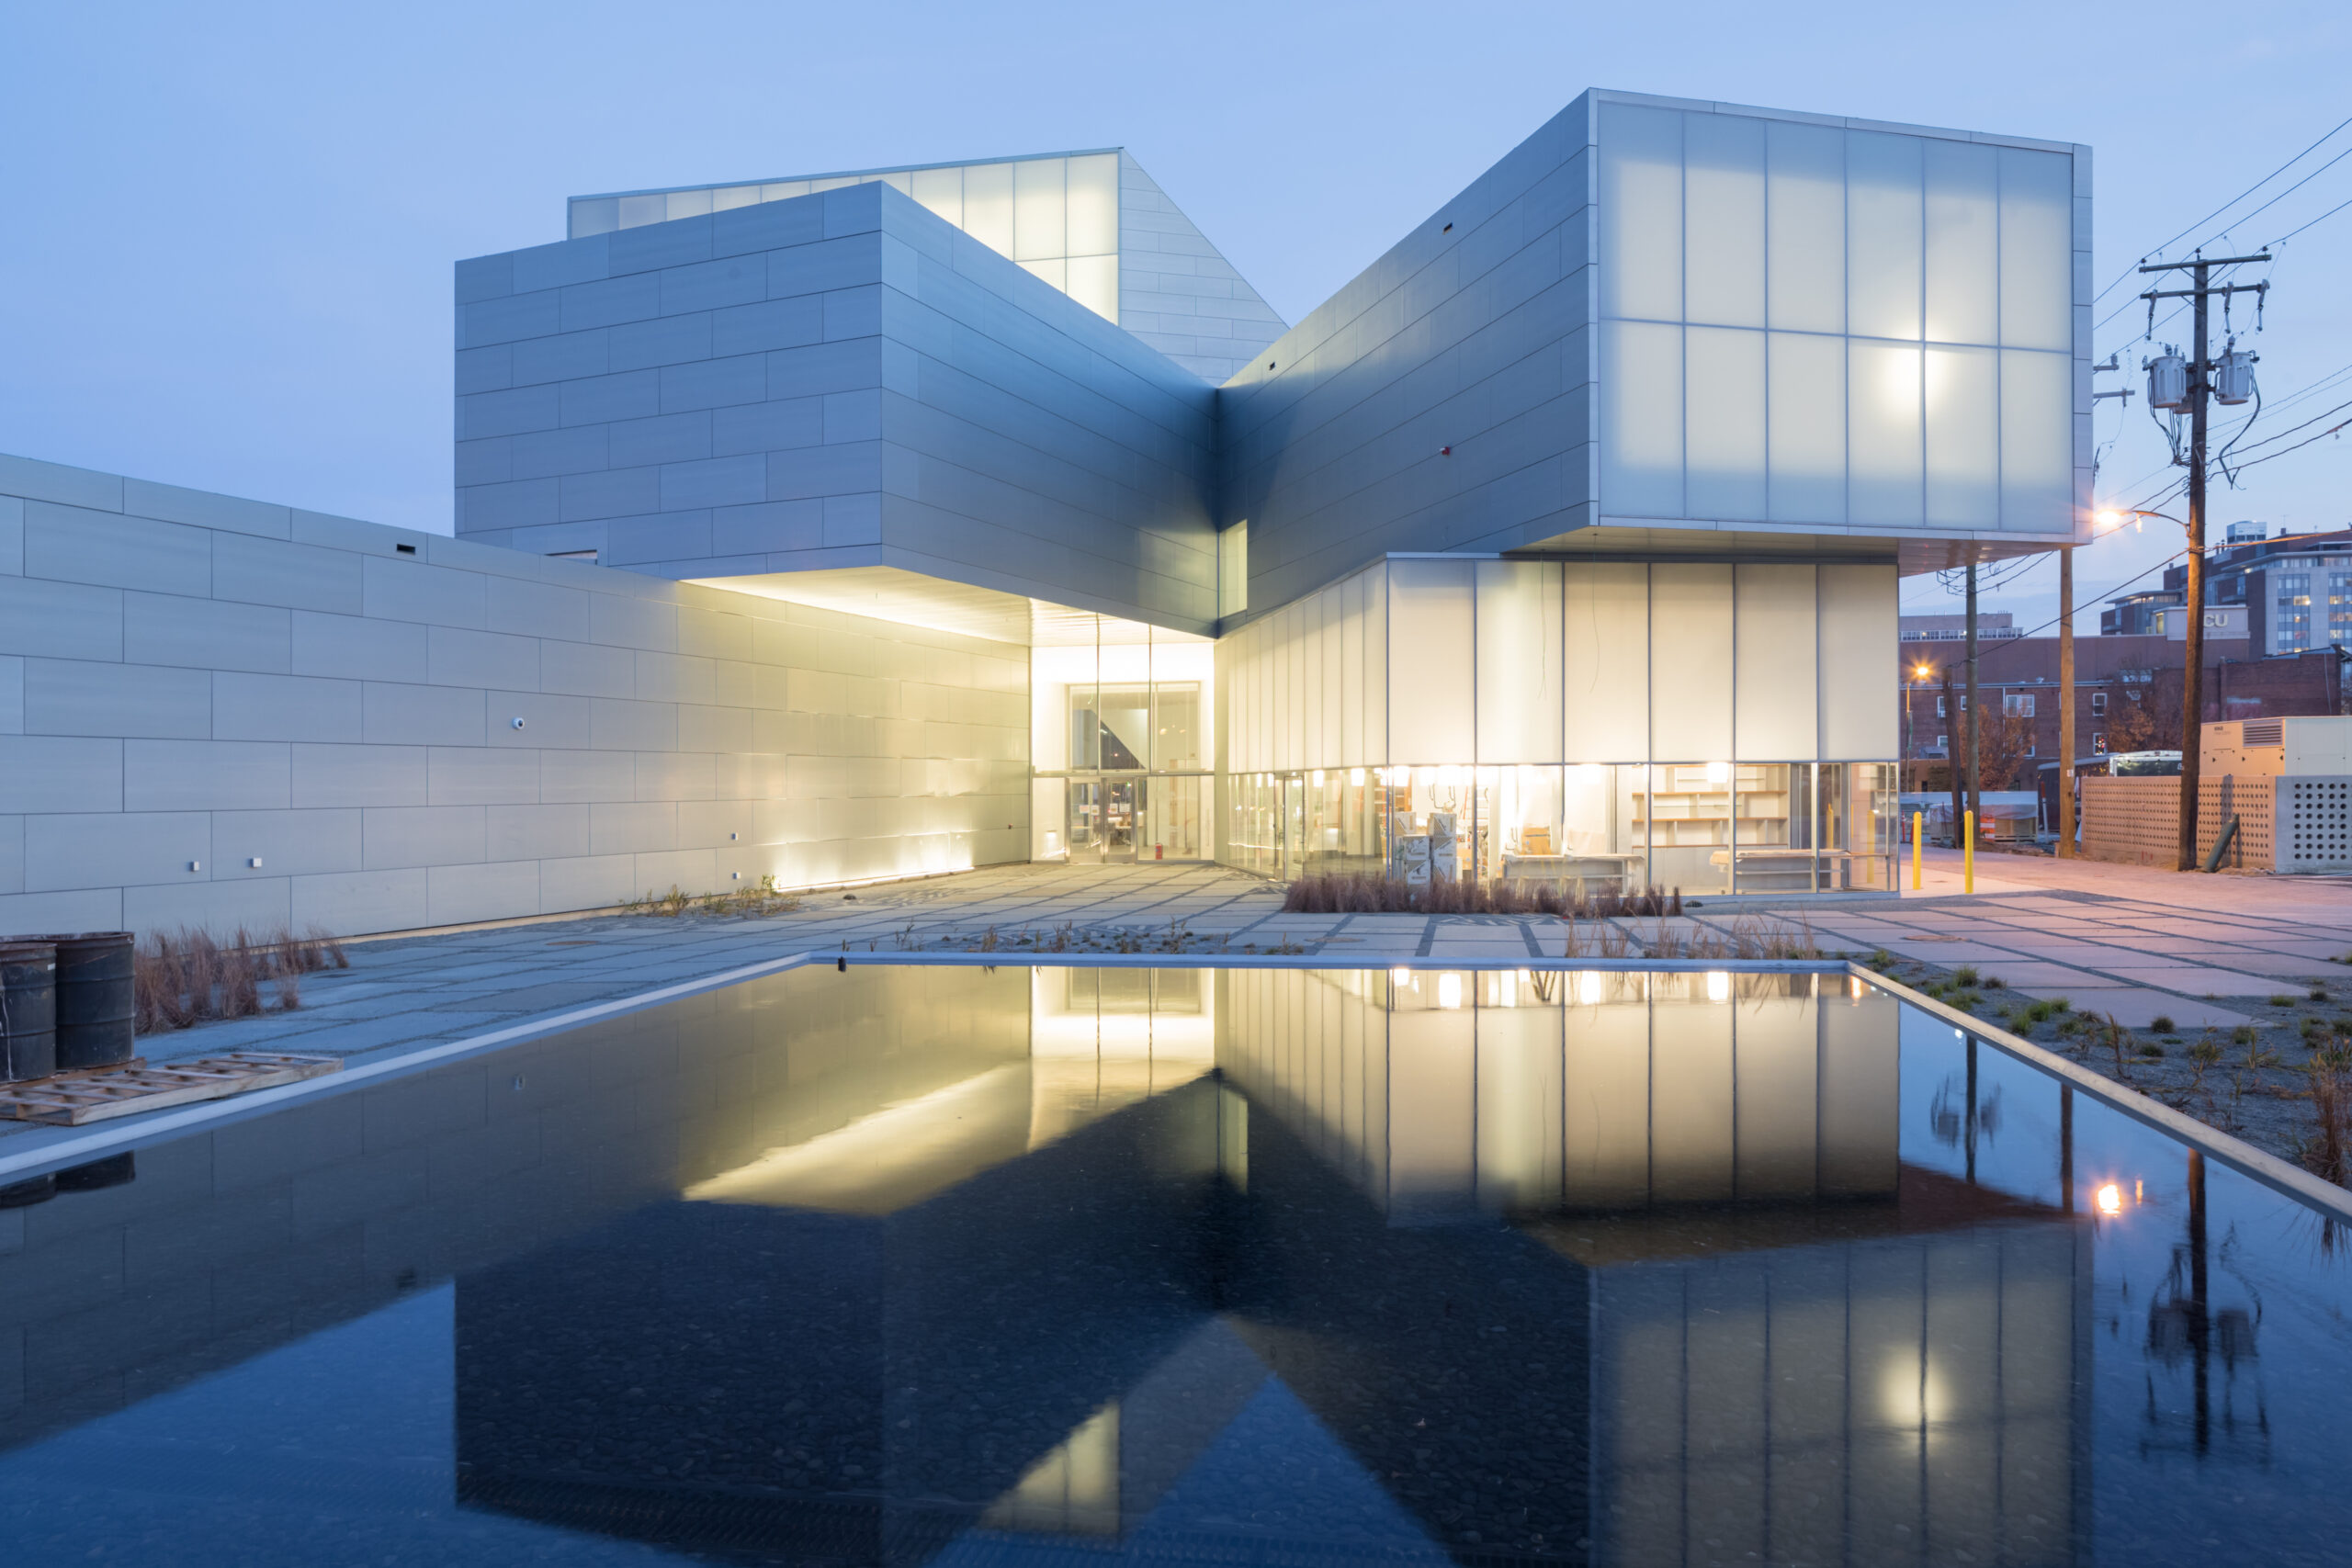 The New York Times, “New Contemporary Art Institute Reverberates in Richmond’s Historic Landscape